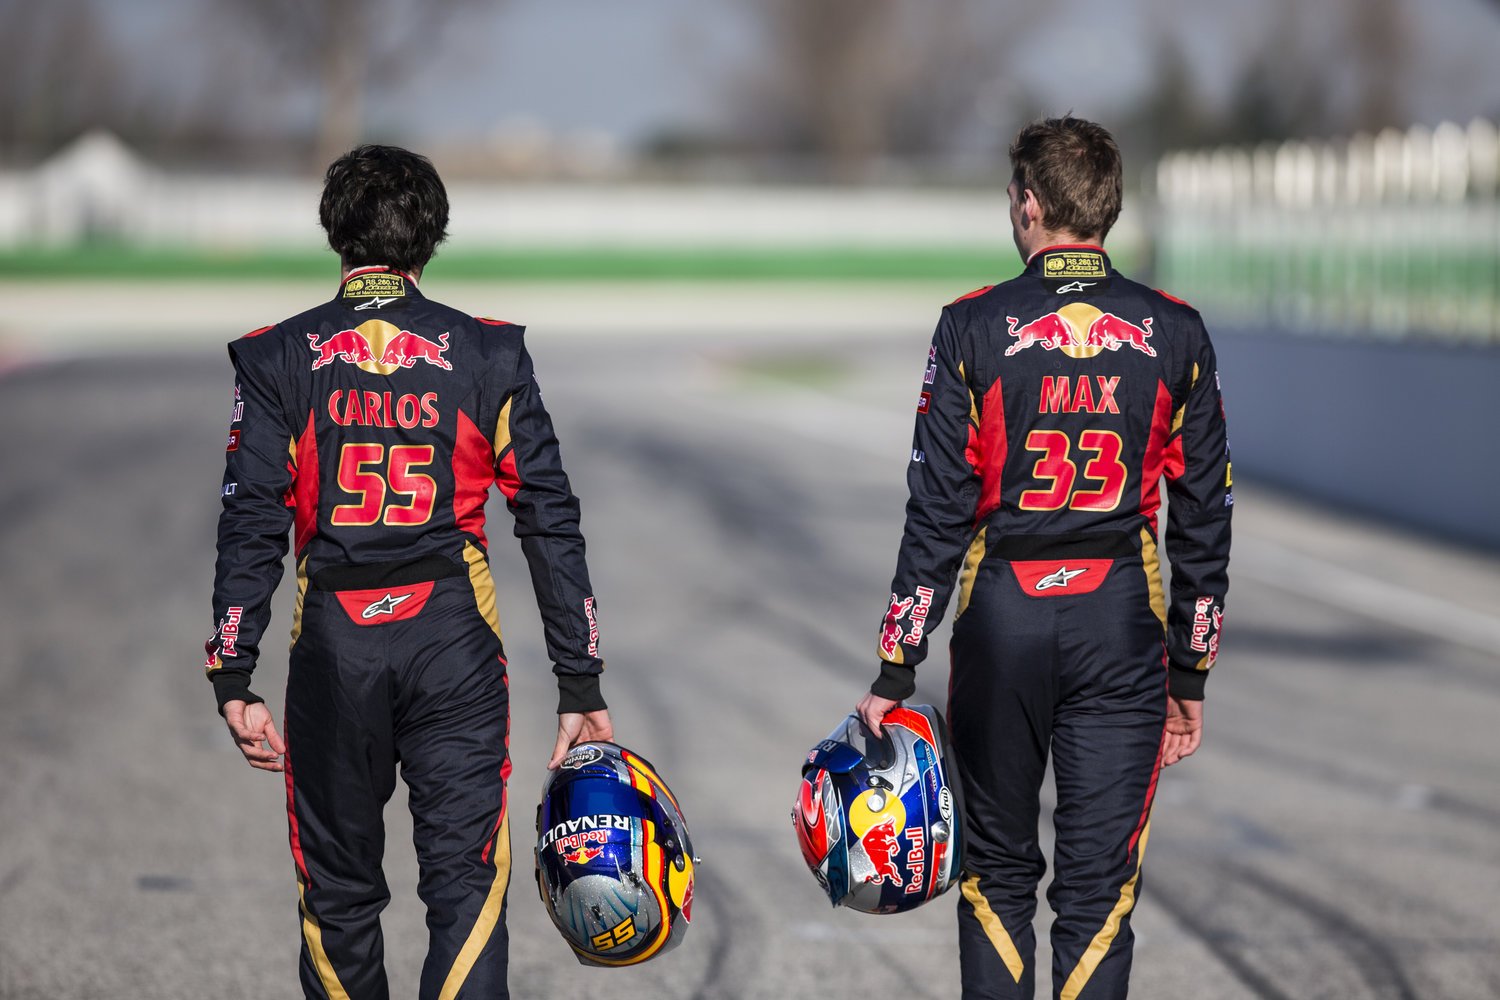 torre-rosso-f1-driver-carlos-sainz-and-max-verstappen-in-barcelona-spain